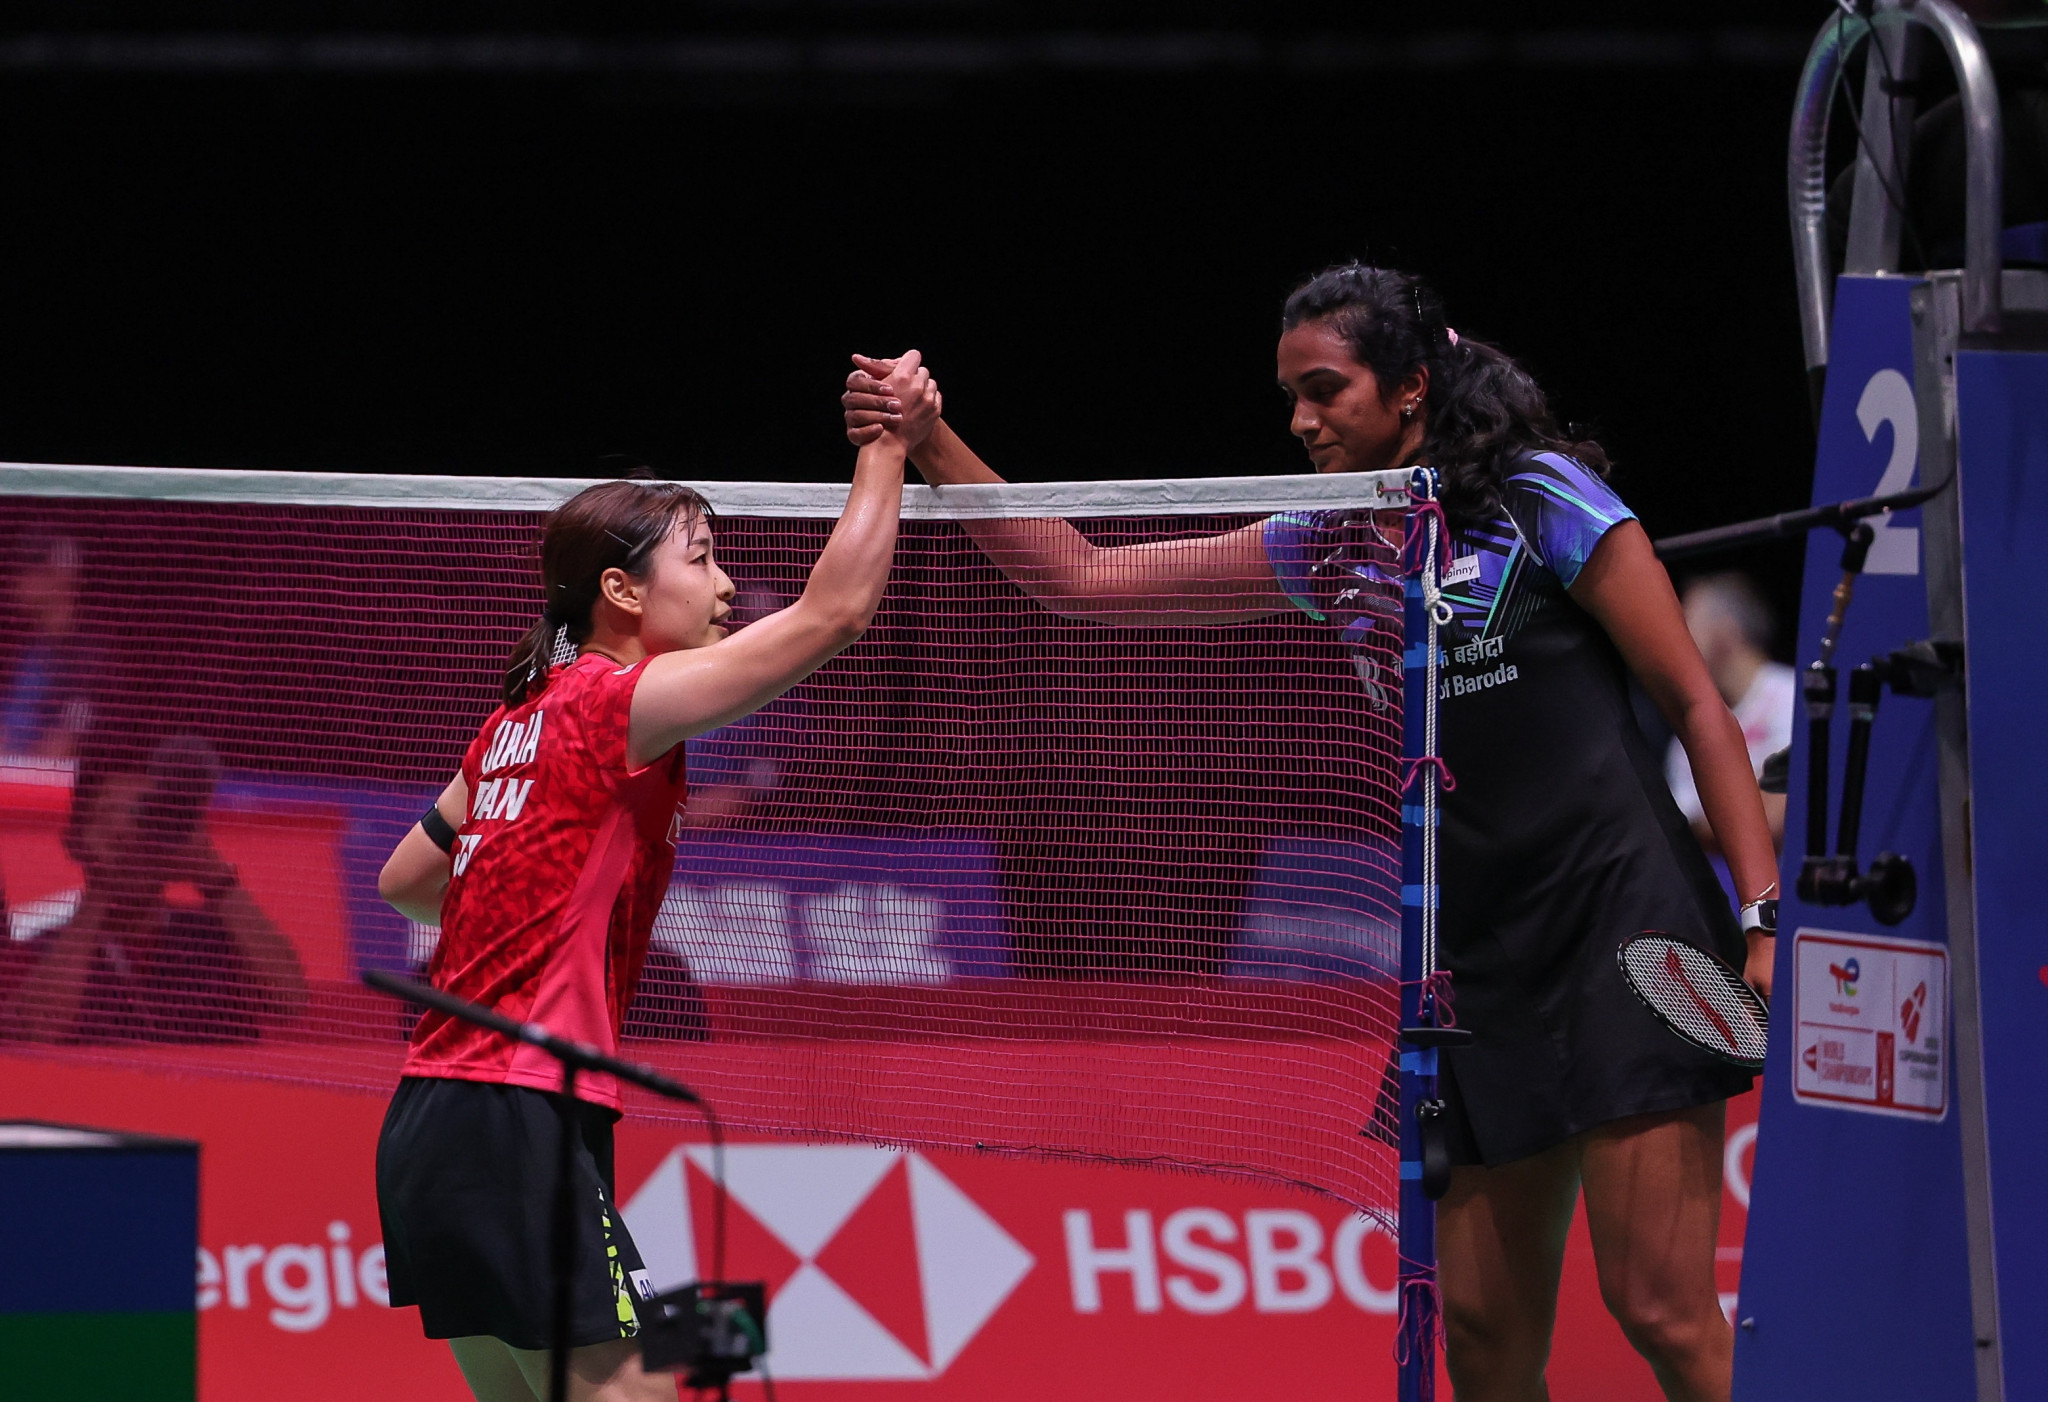 Former world number one Nozomi Okuhara, left, of Japan defeated India's India’s PV Sindhu, right ©Badmintonphoto